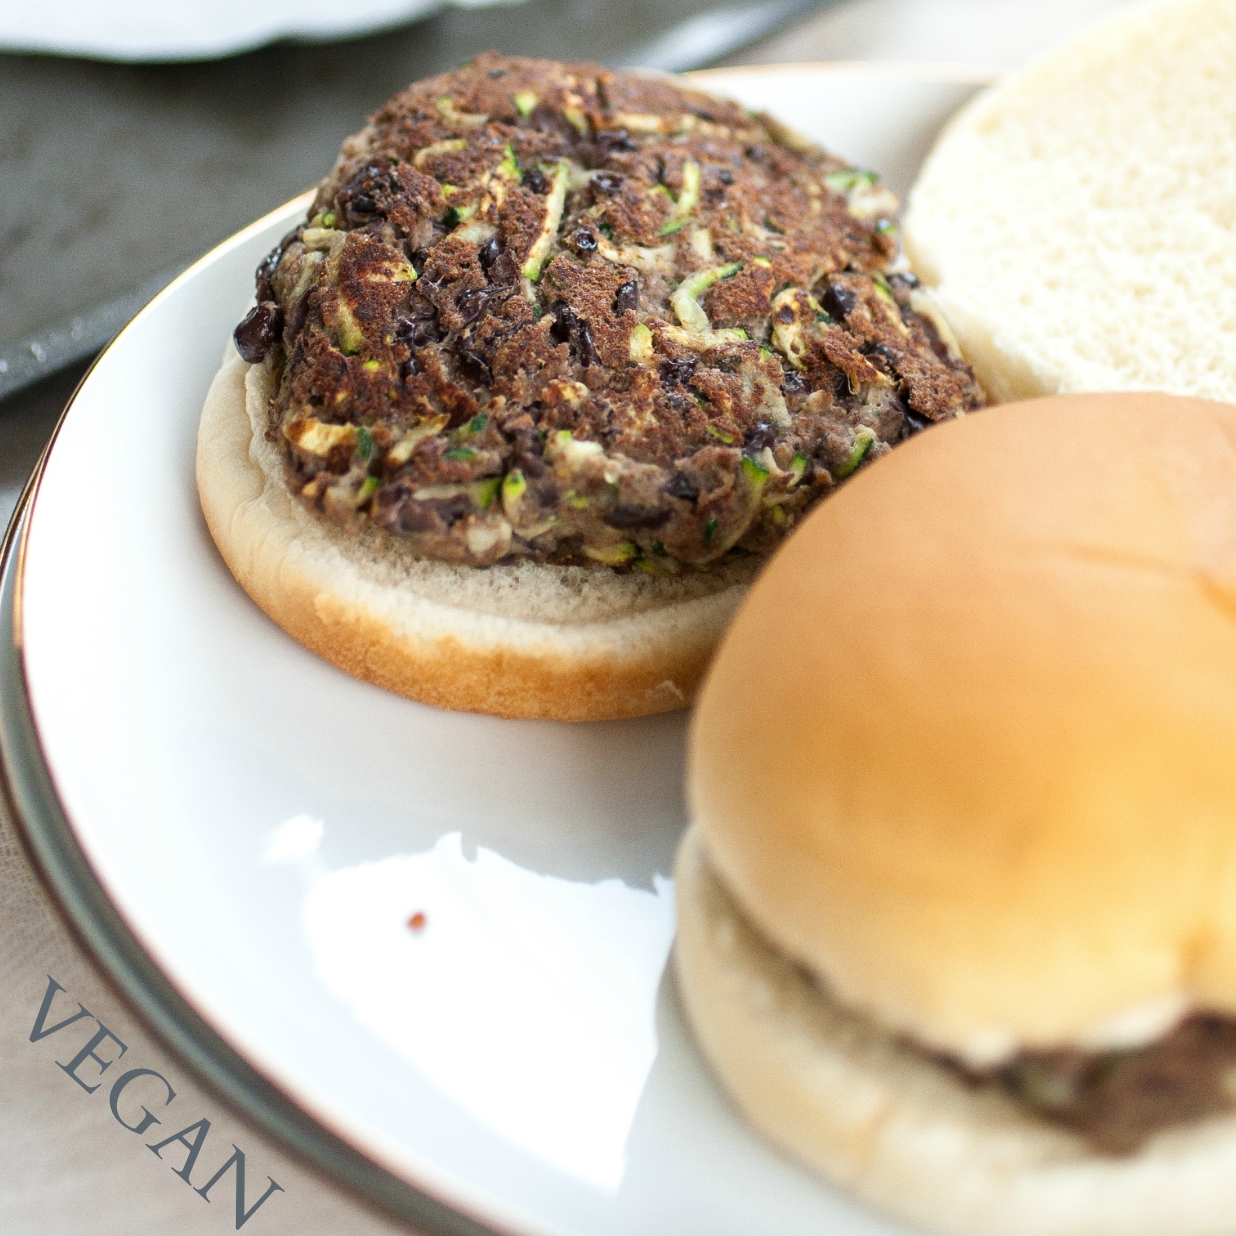 http://www.produceonparade.com/produce-on-parade/simple-black-bean-zucchini-burgers